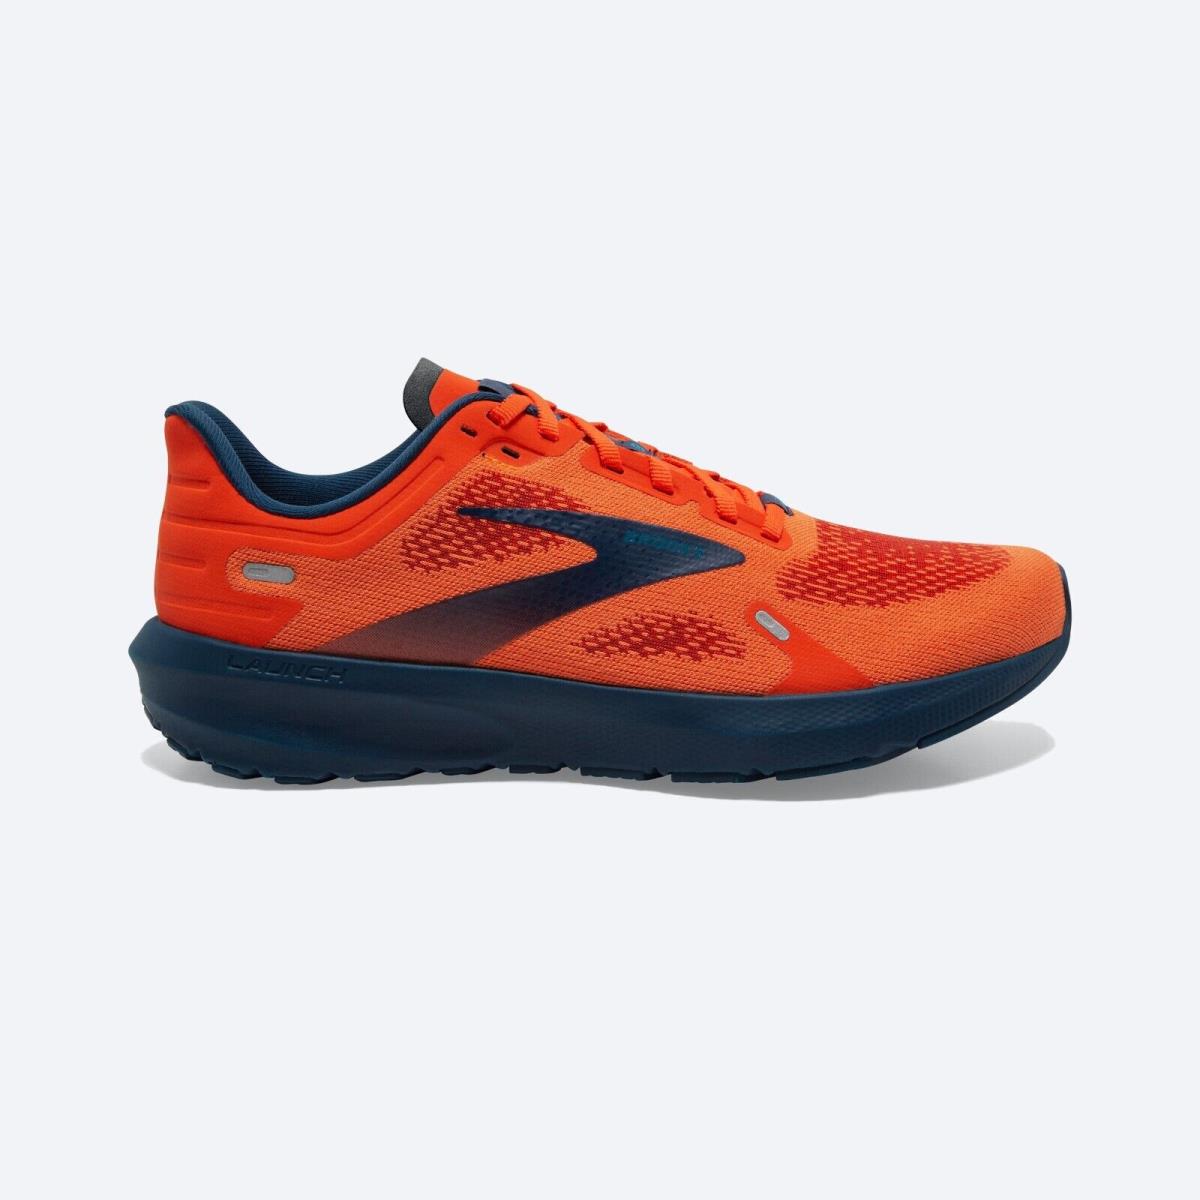 Brooks Speed Neutral Orange Flame/titan/teal Launch 9 Running Shoes Mens 11 45